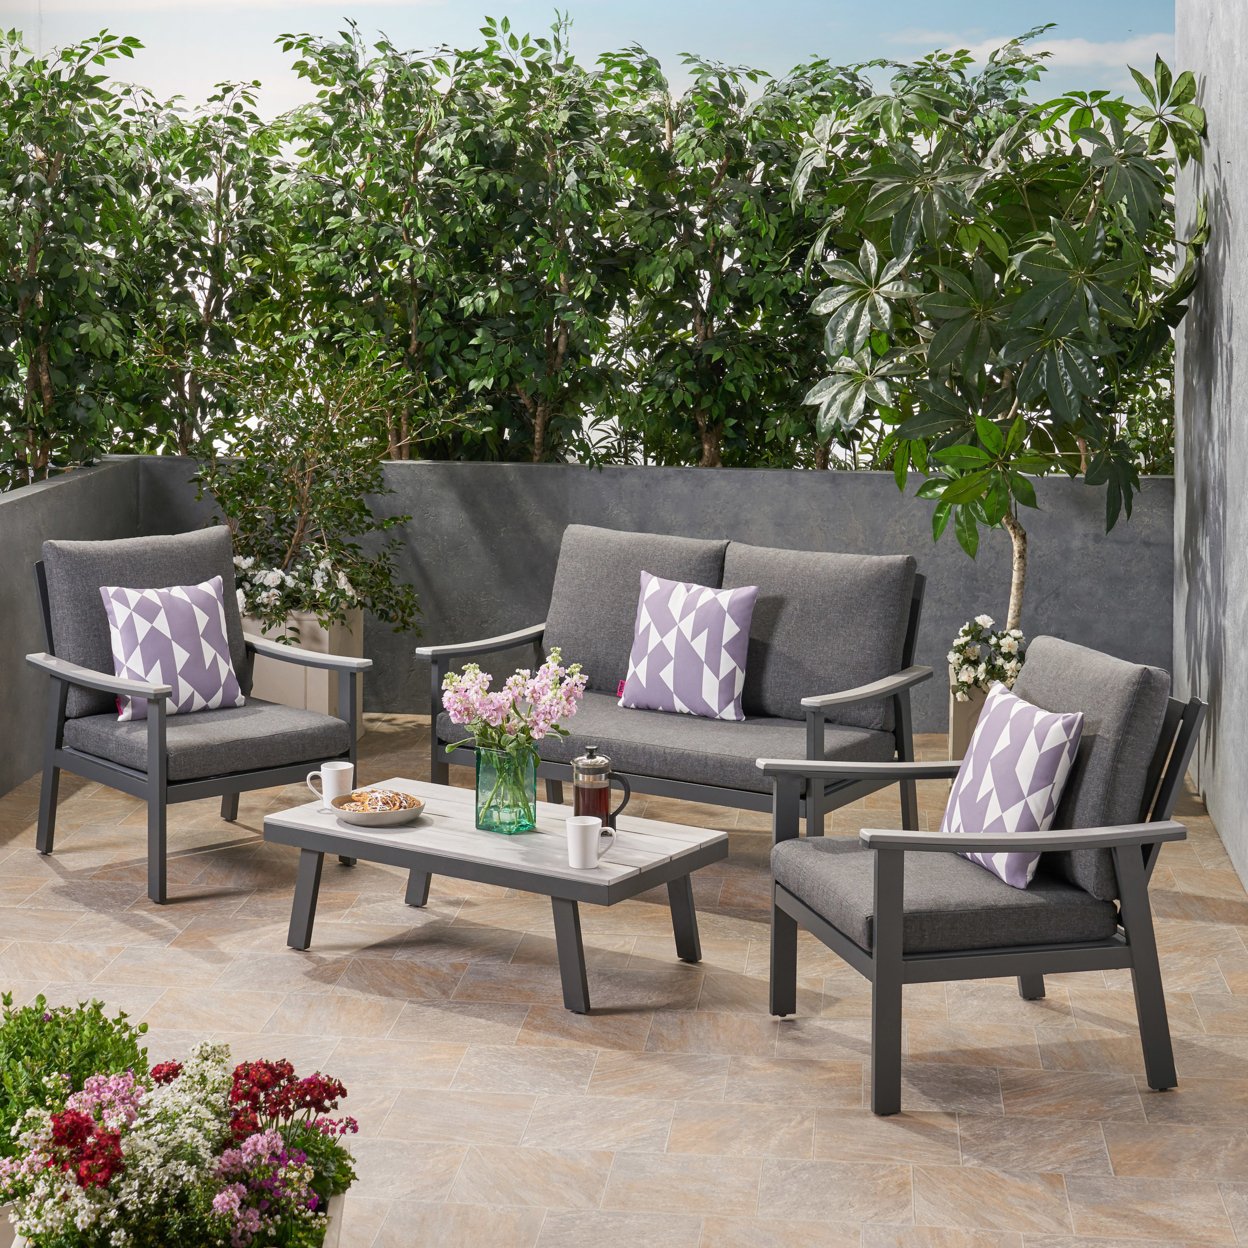 Agnes Outdoor 4 Piece Aluminum And Faux Wood Chat Set With Cushions - Gray, Dark Gray